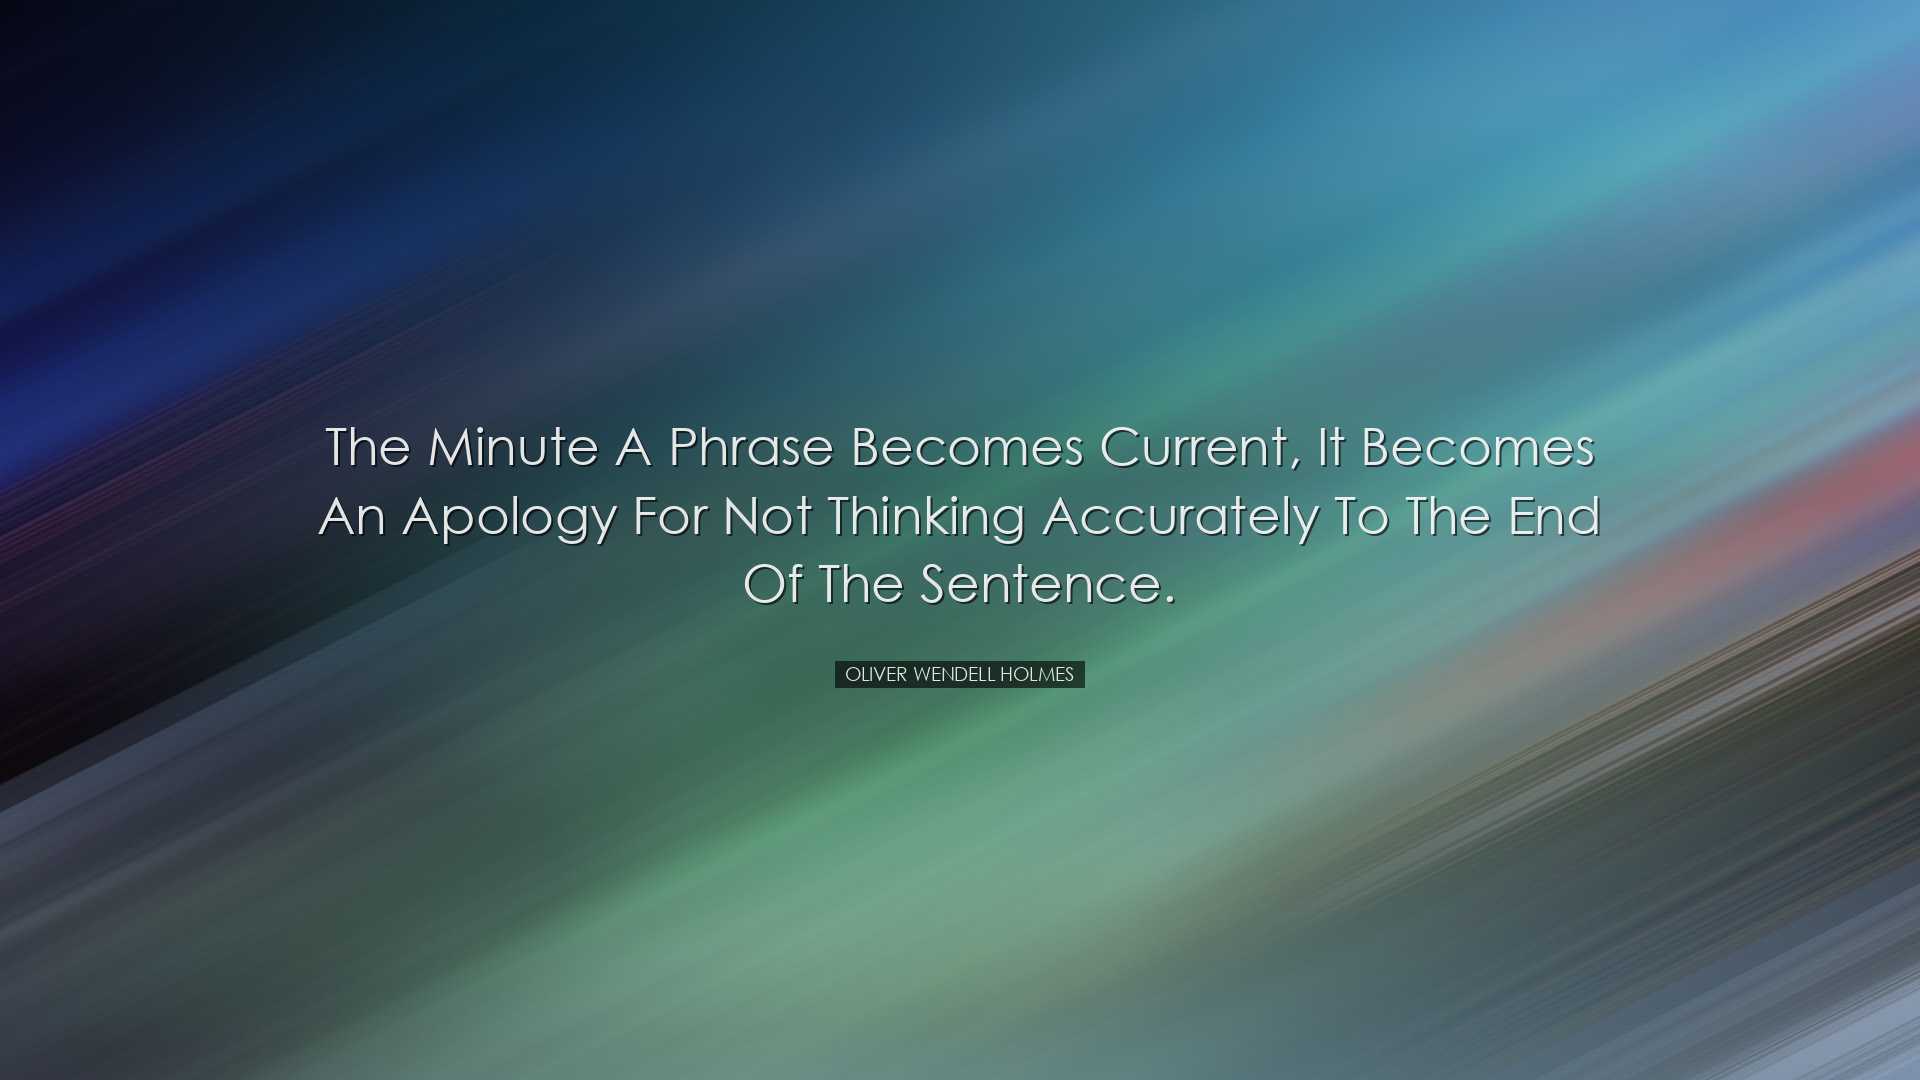 The minute a phrase becomes current, it becomes an apology for not